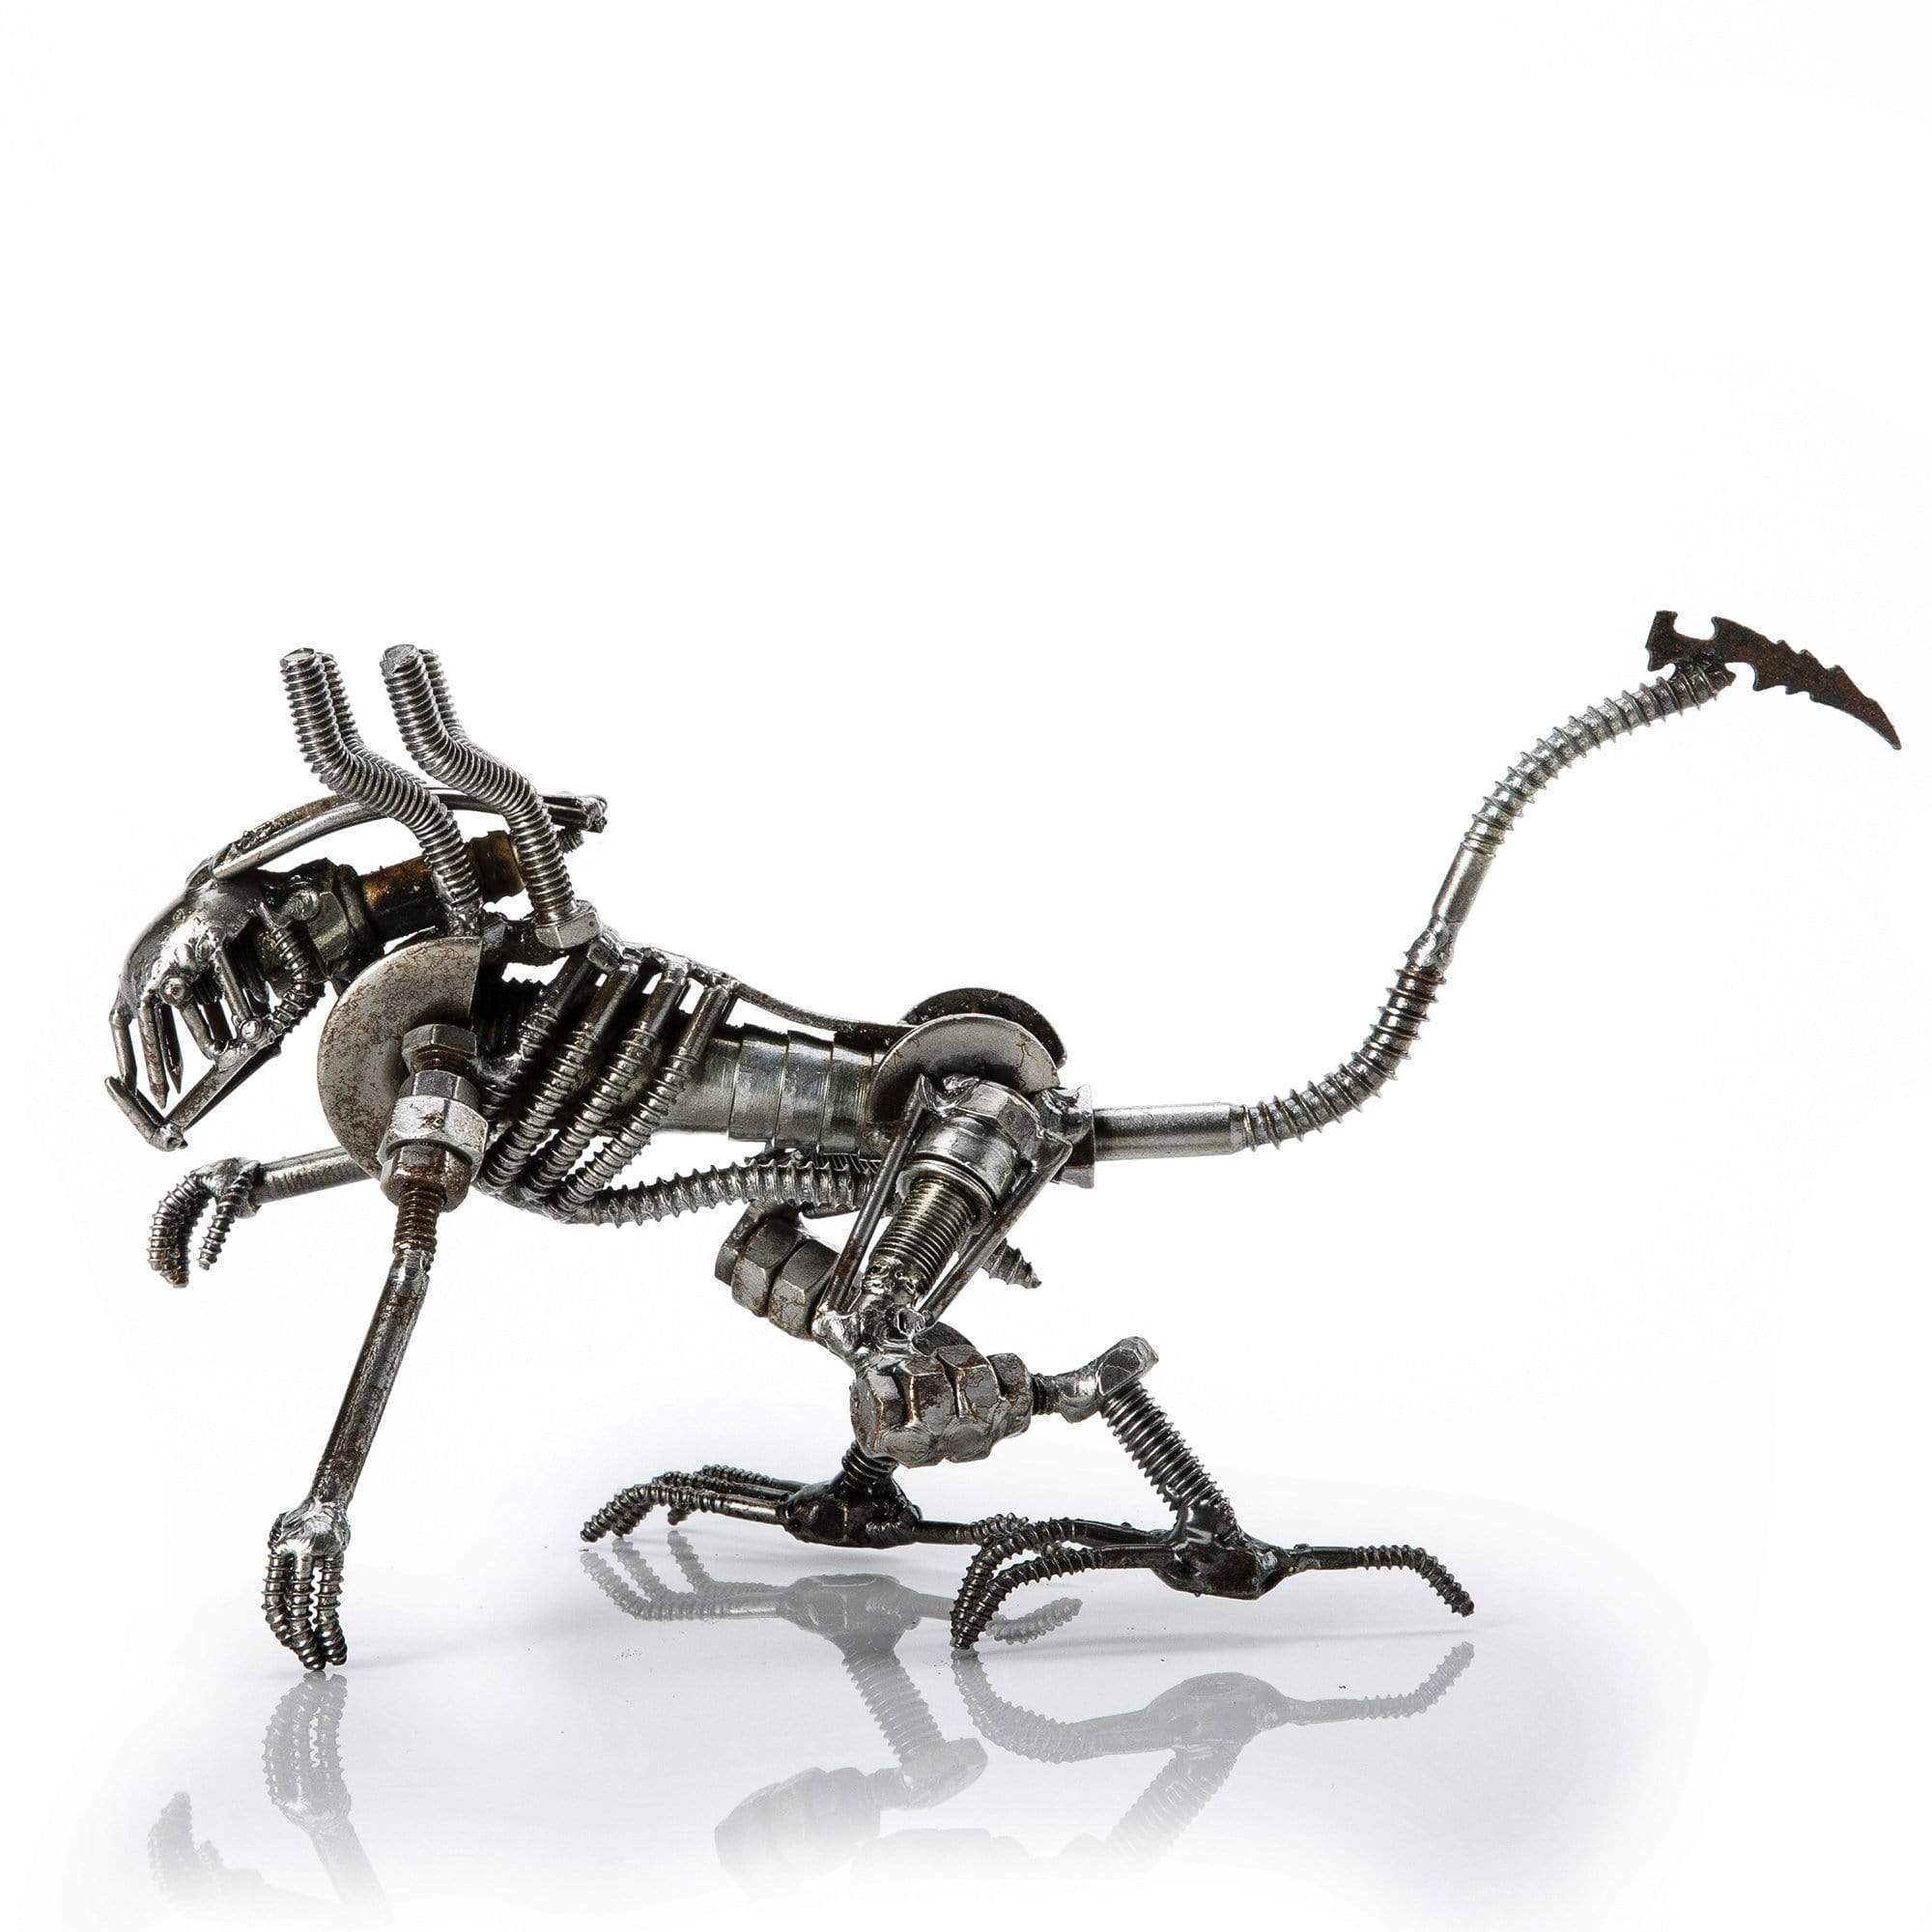 Kalifano Recycled Metal Art Alien Crouched Inspired Recycled Metal Sculpture RMS-350AN-N